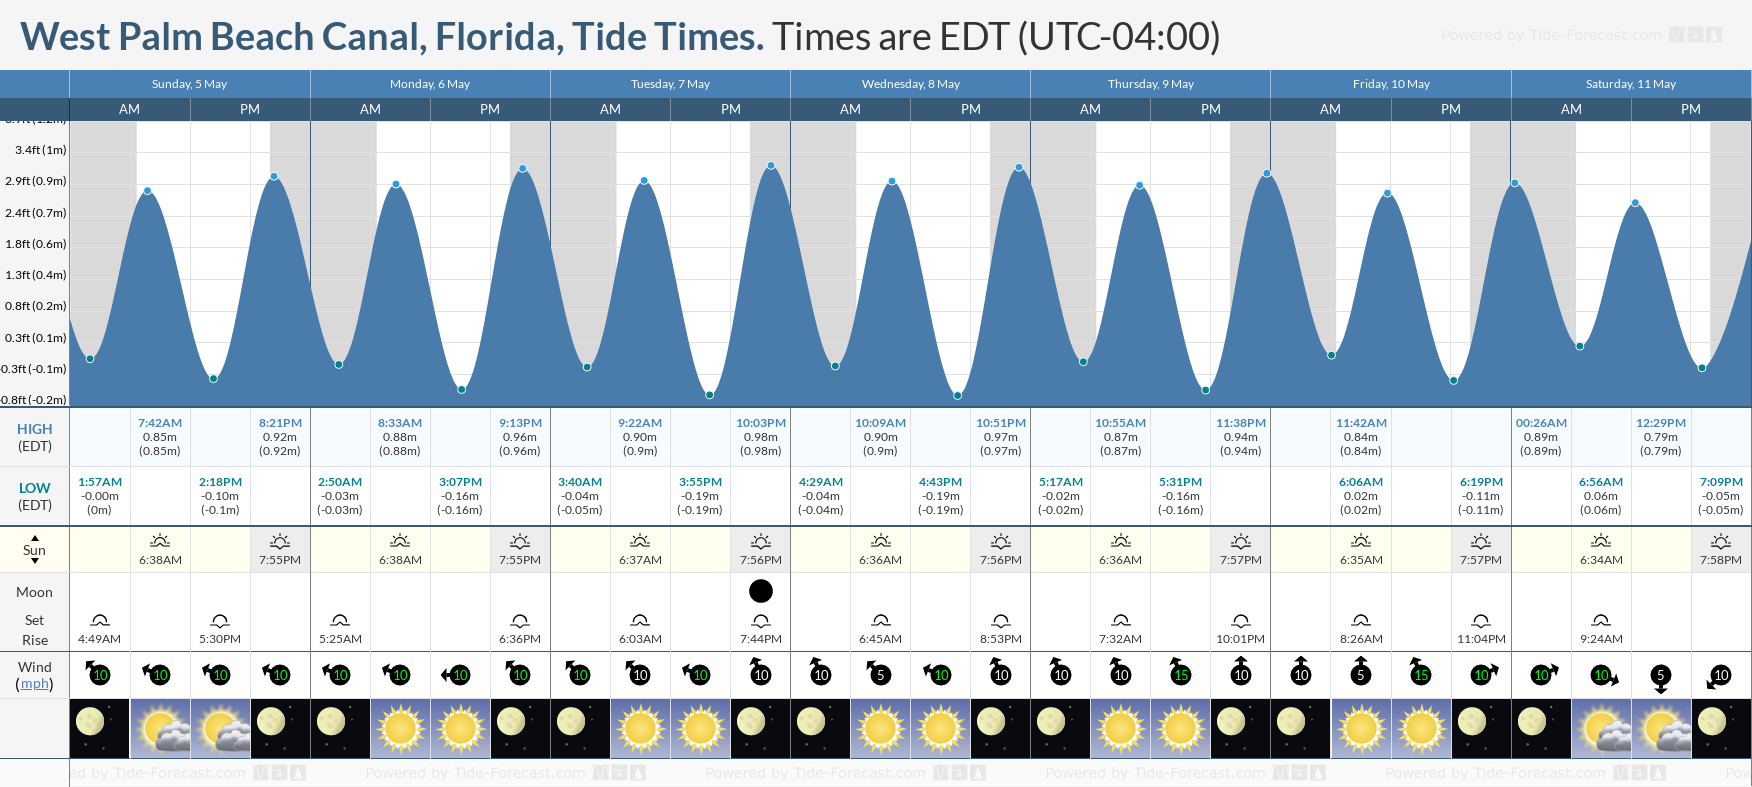 West Palm Beach Canal, Florida Tide Chart including high and low tide tide times for the next 7 days